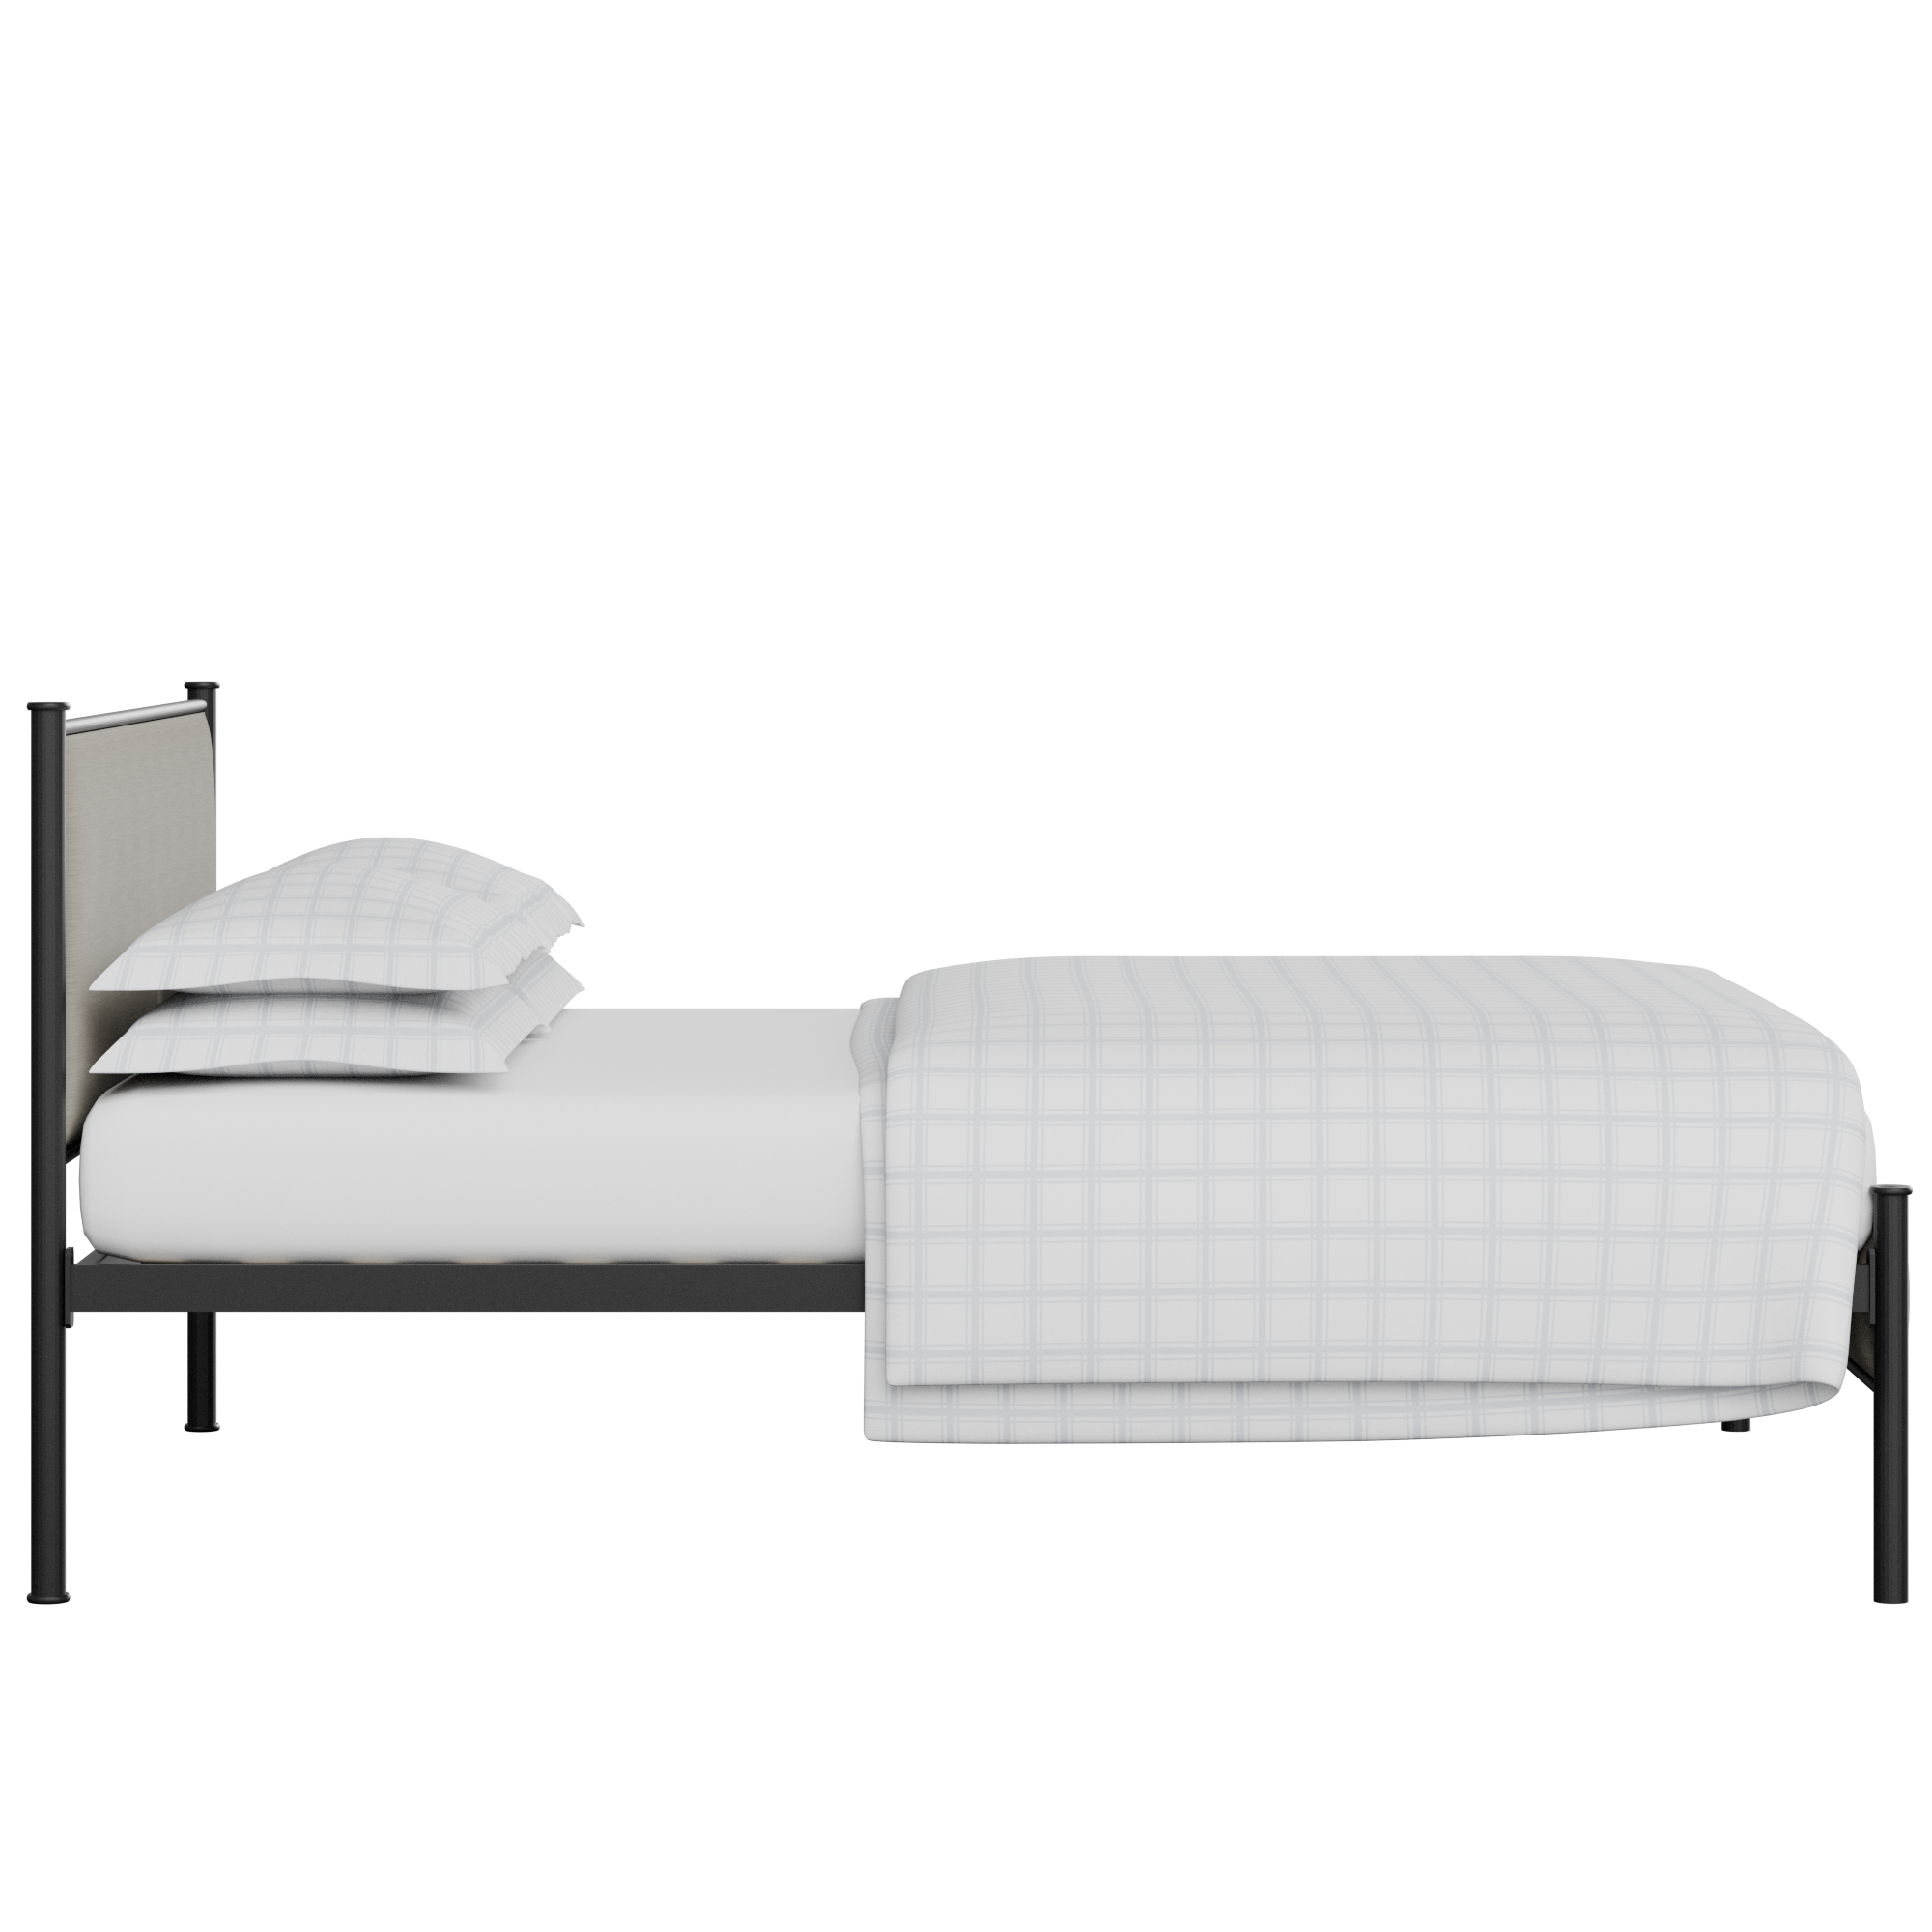 Brest iron/metal upholstered bed in black with grey fabric